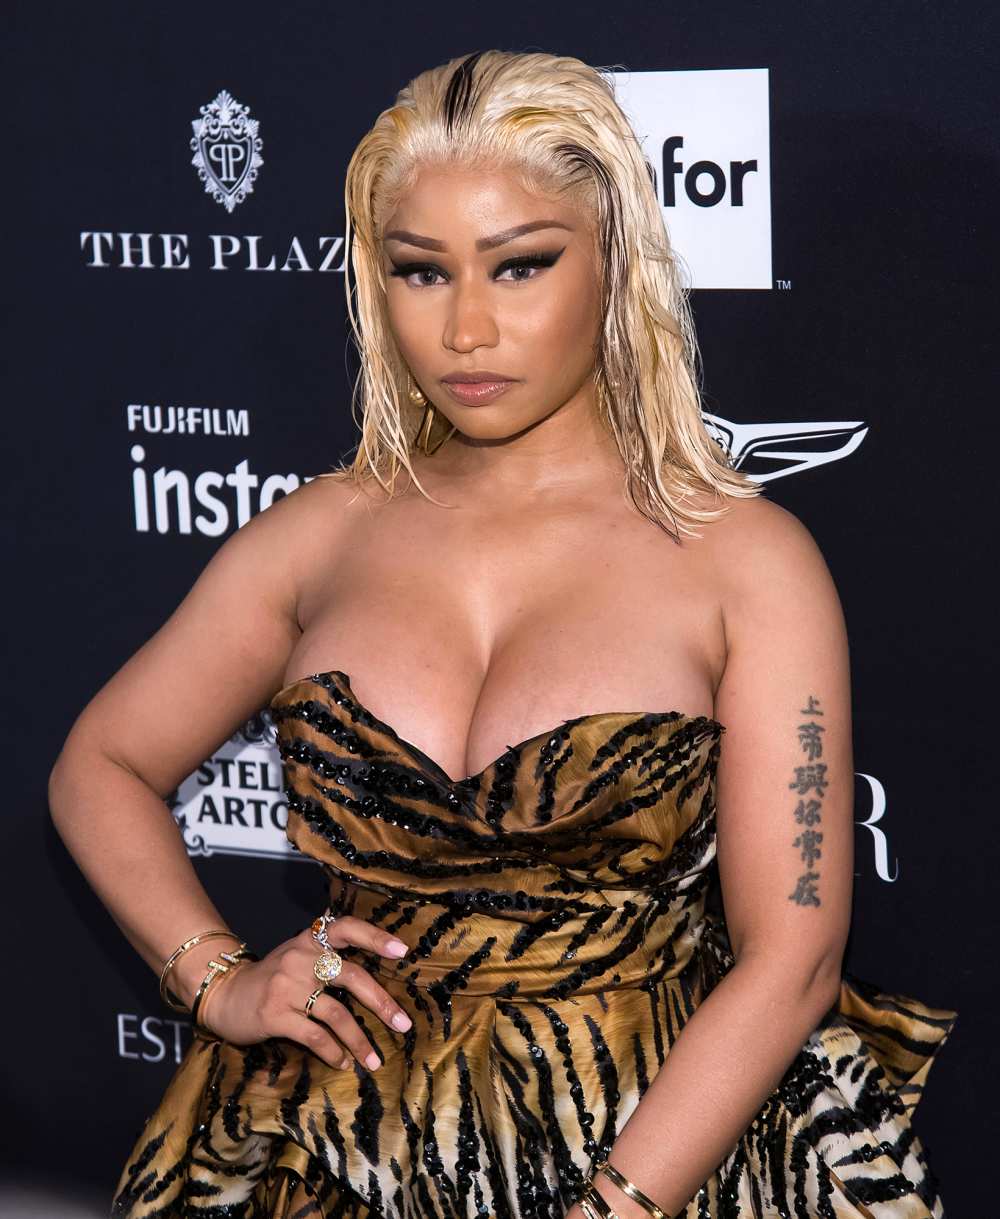 Nicki Minaj Shares First Video of Son, Reveals the Unique Name She Almost Chose: 'I Might Still Change It'